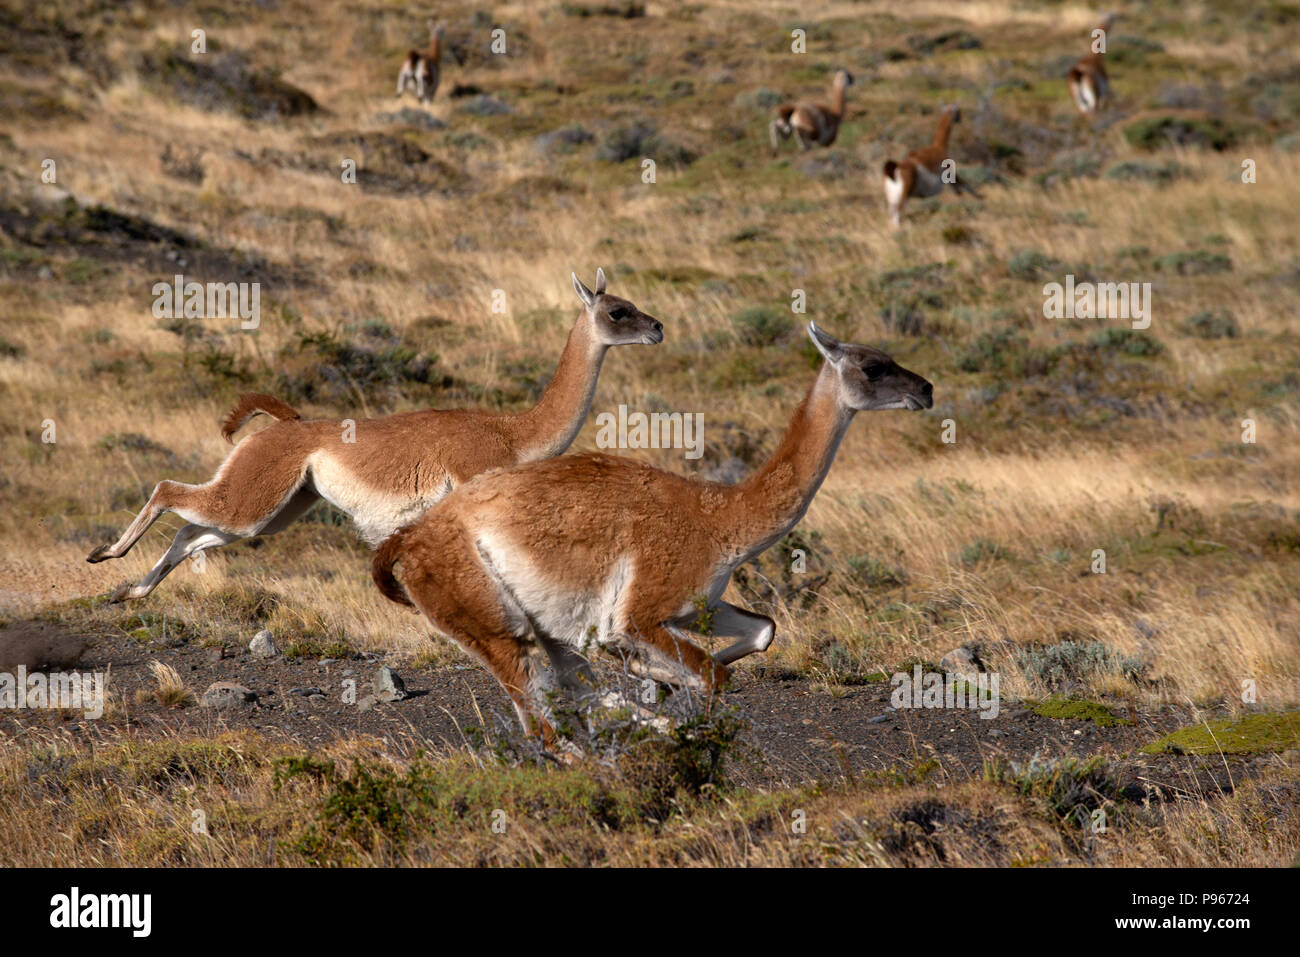 2 adult guanaco fleeing in panic after spotting a Patagonian Puma stalking the herd they were part of Stock Photo